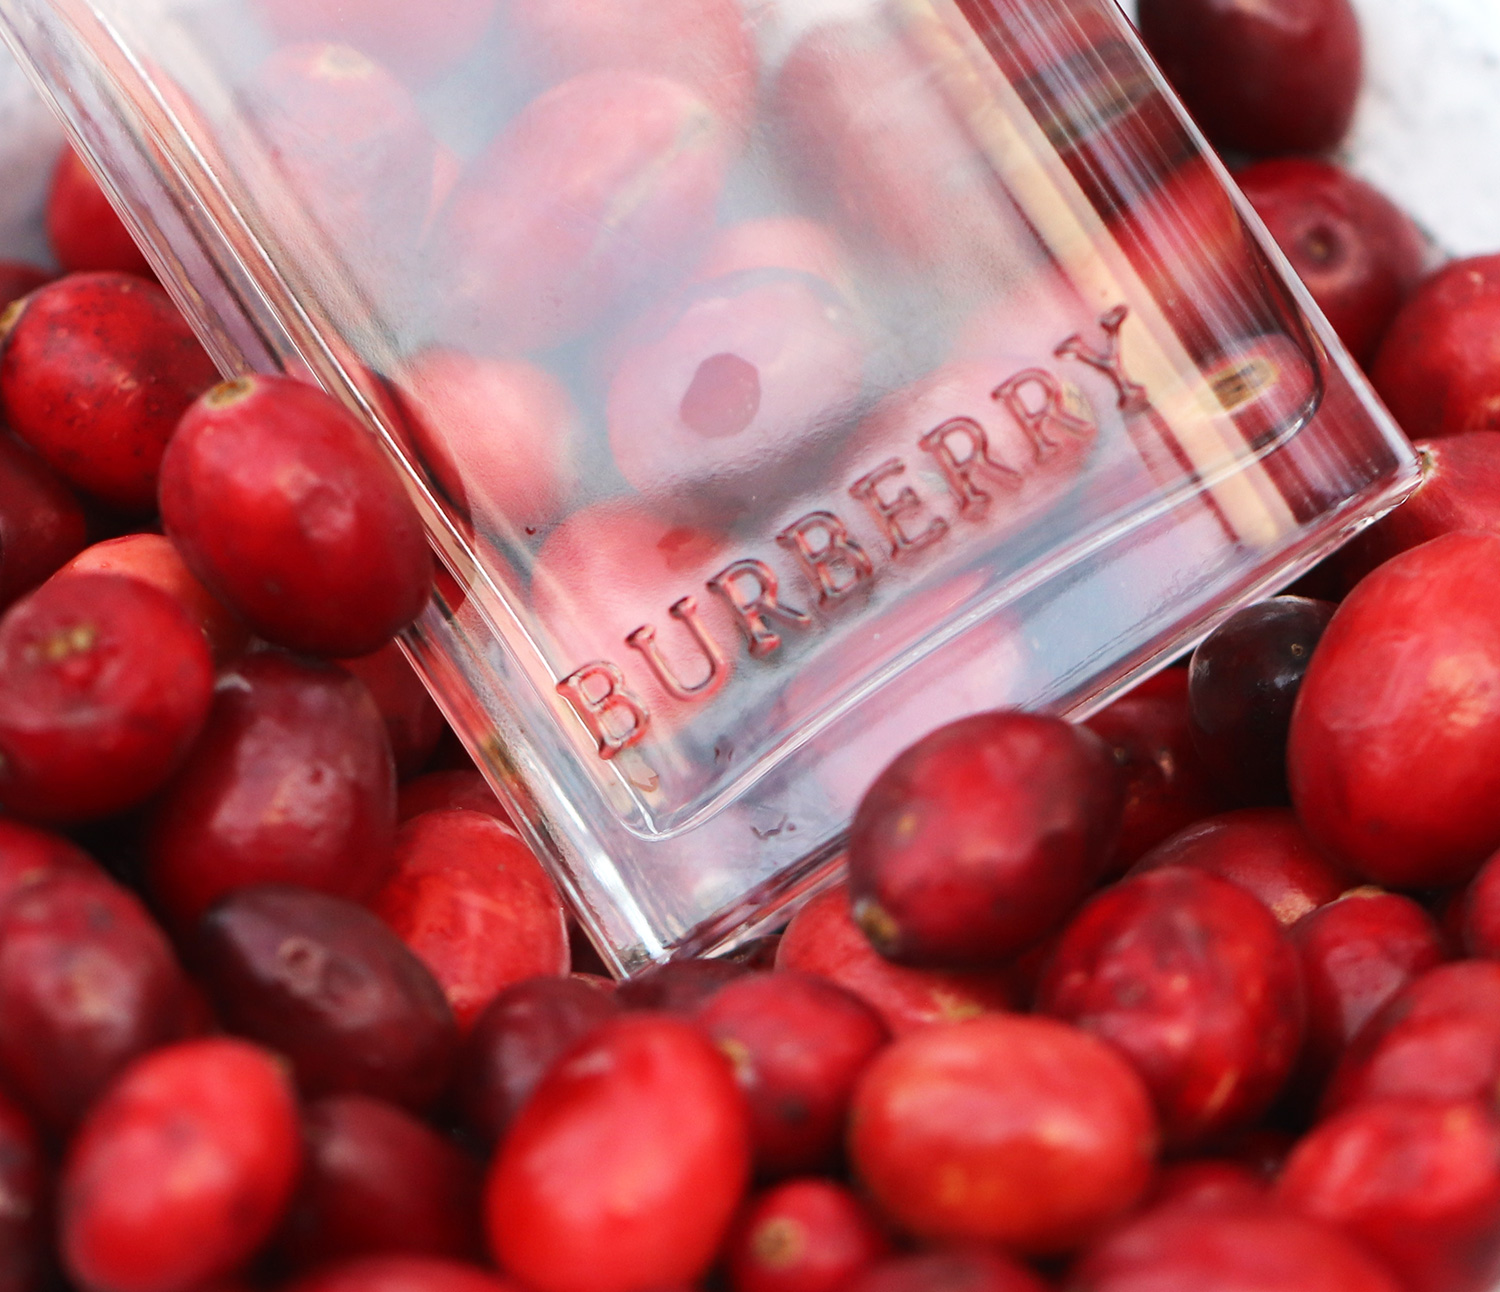 Burberry Her: A Berry Fragrance with a 